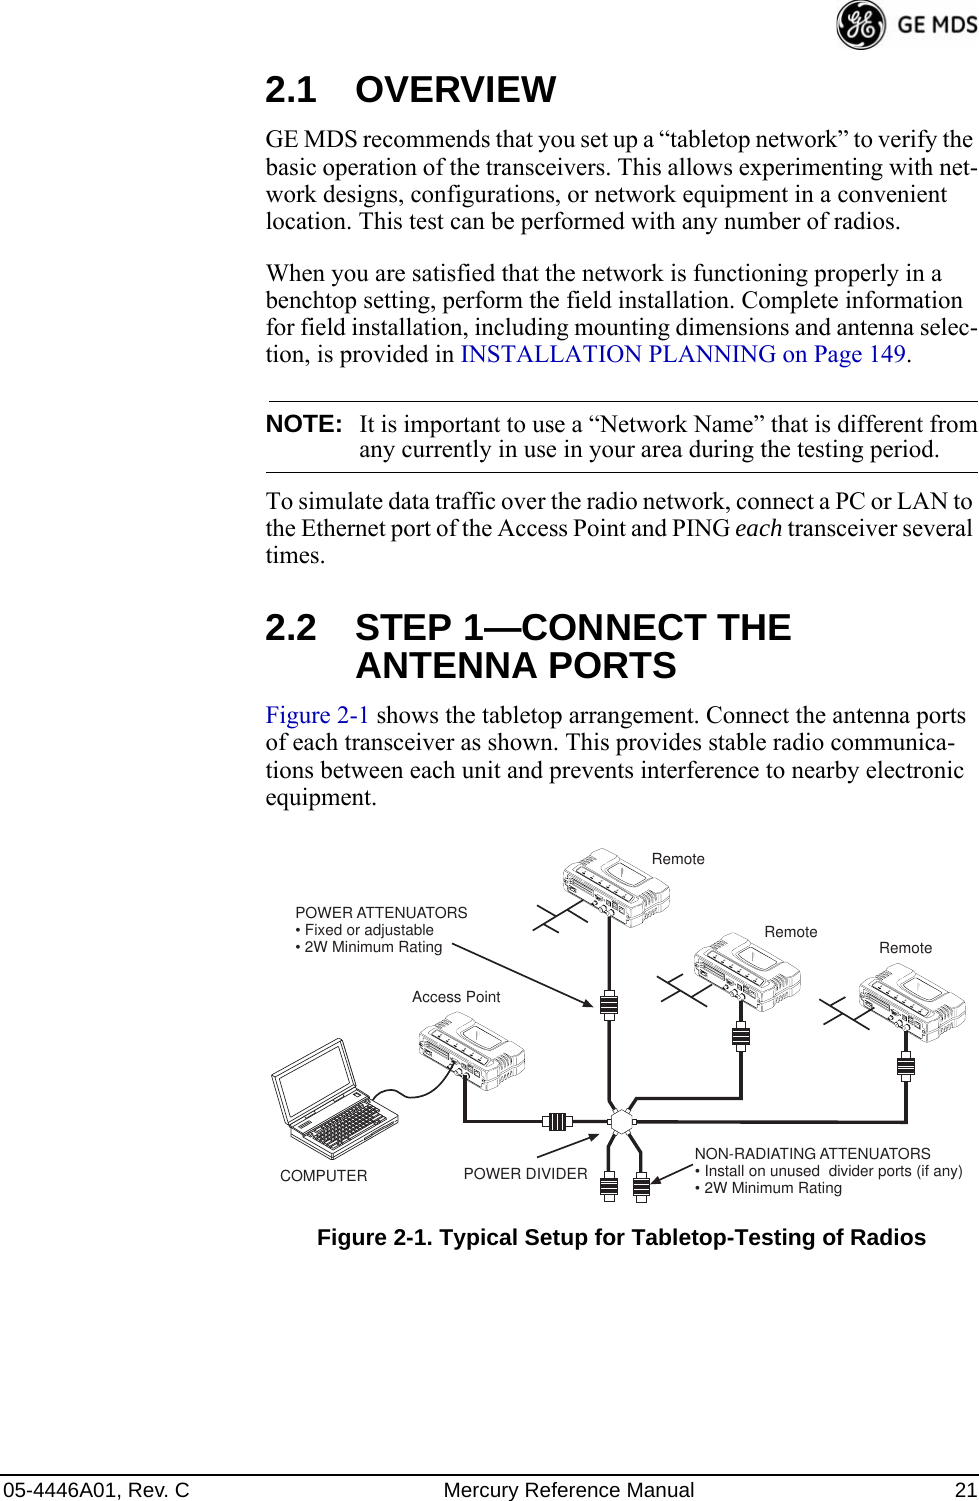 05-4446A01, Rev. C Mercury Reference Manual 212.1 OVERVIEWGE MDS recommends that you set up a “tabletop network” to verify the basic operation of the transceivers. This allows experimenting with net-work designs, configurations, or network equipment in a convenient location. This test can be performed with any number of radios.When you are satisfied that the network is functioning properly in a benchtop setting, perform the field installation. Complete information for field installation, including mounting dimensions and antenna selec-tion, is provided in INSTALLATION PLANNING on Page 149.NOTE: It is important to use a “Network Name” that is different fromany currently in use in your area during the testing period.To simulate data traffic over the radio network, connect a PC or LAN to the Ethernet port of the Access Point and PING each transceiver several times.2.2 STEP 1—CONNECT THE ANTENNA PORTSFigure 2-1 shows the tabletop arrangement. Connect the antenna ports of each transceiver as shown. This provides stable radio communica-tions between each unit and prevents interference to nearby electronic equipment.Invisible place holderFigure 2-1. Typical Setup for Tabletop-Testing of RadiosPOWER ATTENUATORS• Fixed or adjustable• 2W Minimum RatingPOWER DIVIDERNON-RADIATING ATTENUATORS• Install on unused  divider ports (if any)• 2W Minimum RatingCOMPUTERRemote RemoteAccess PointRemote